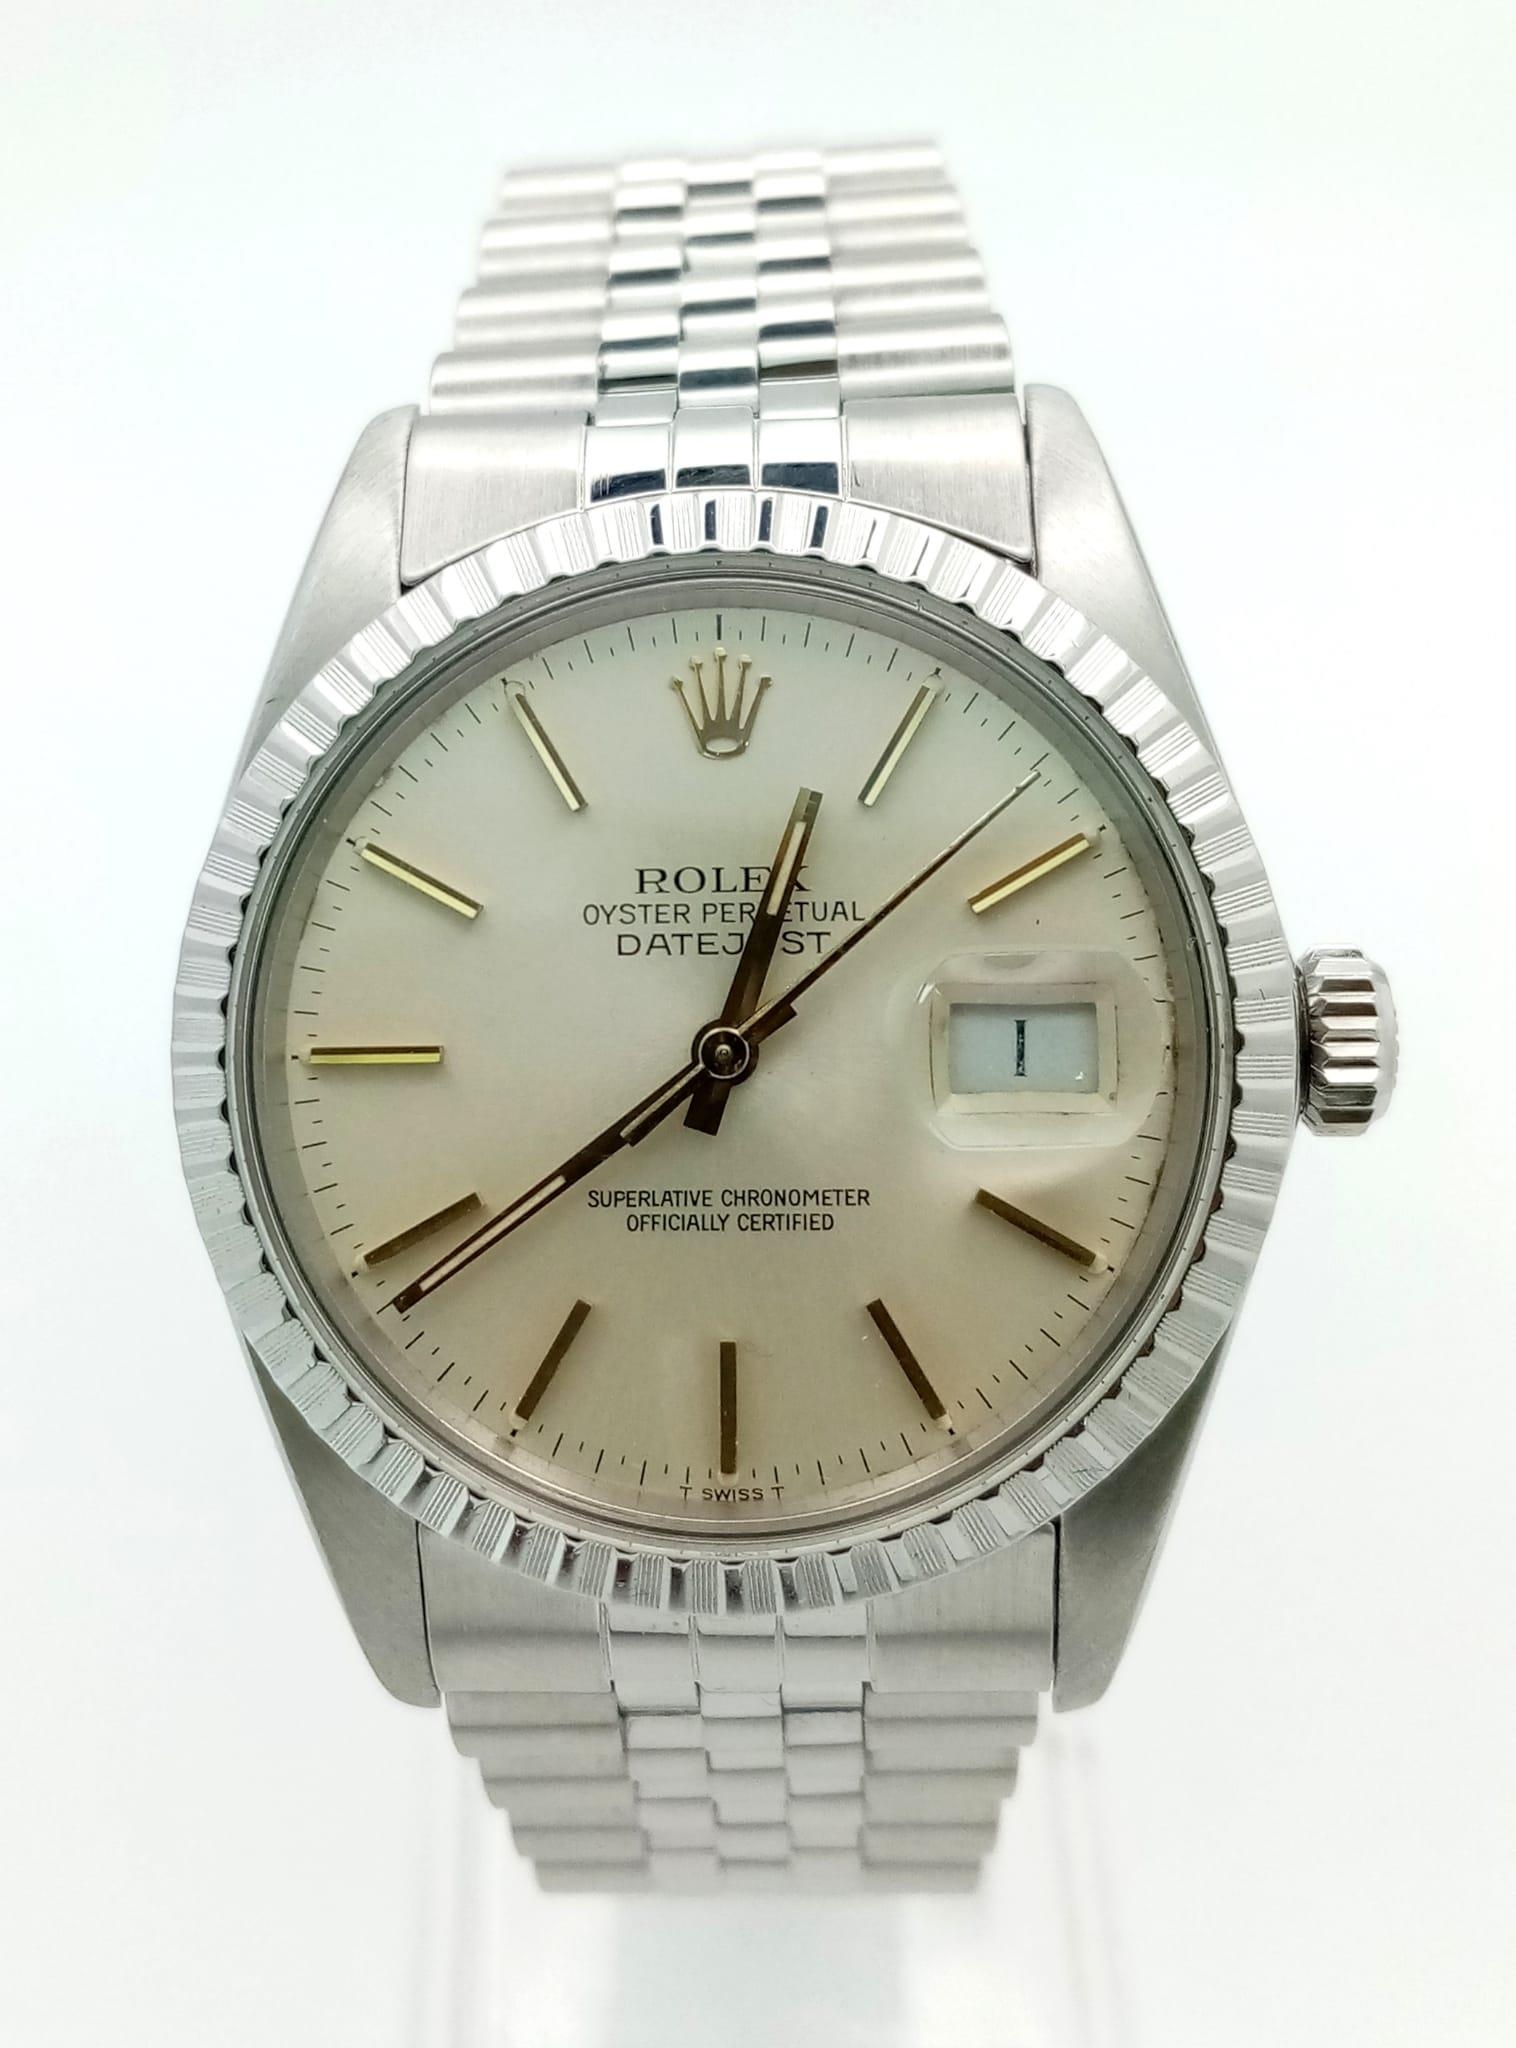 A Rolex Oyster Perpetual Datejust Gents Watch. Stainless steel strap and case - 36mm. Cream dial.